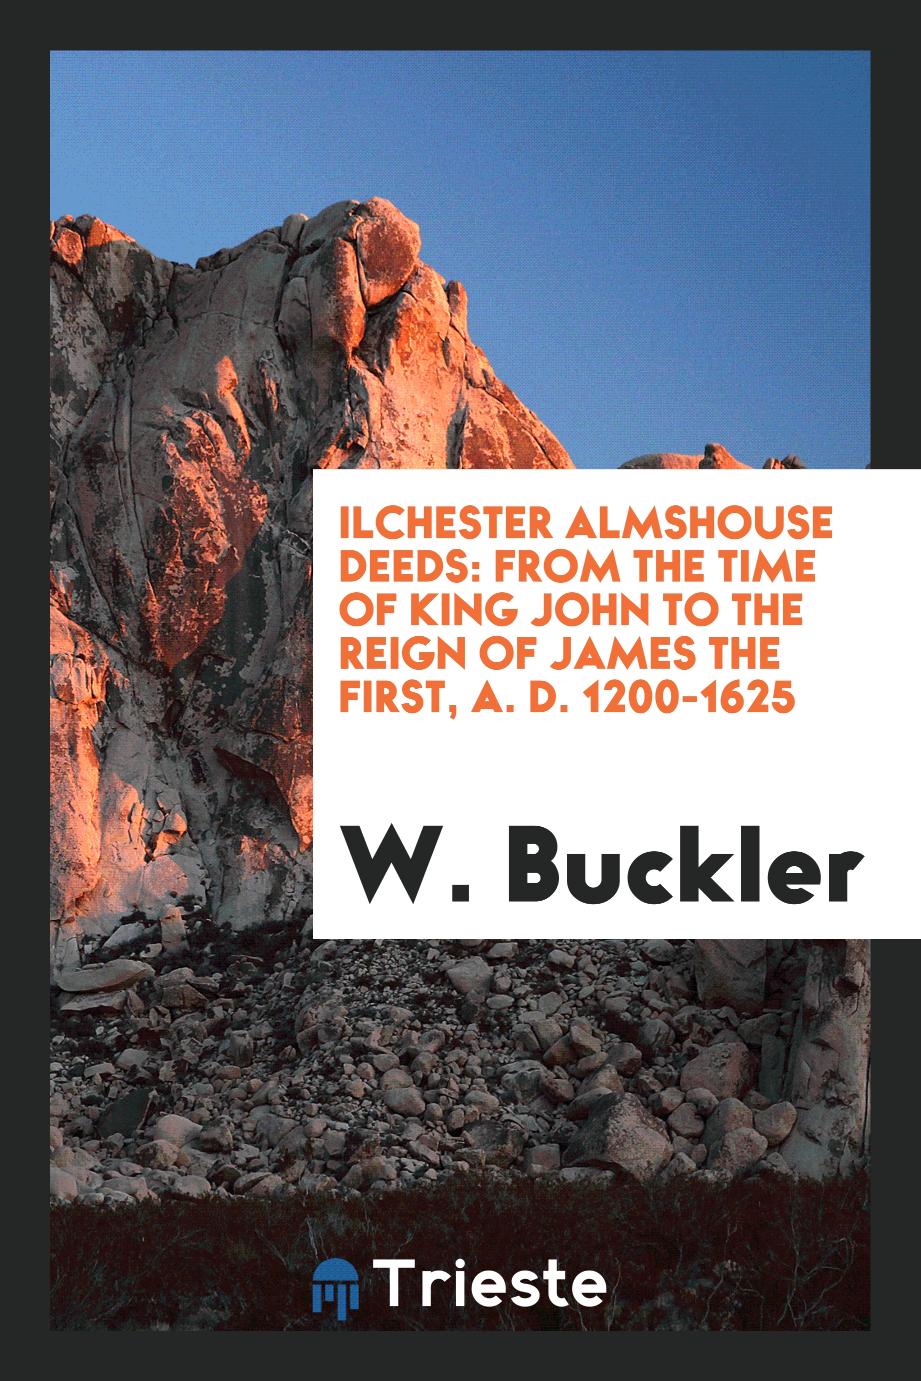 Ilchester almshouse deeds: from the time of King John to the reign of James the first, A. D. 1200-1625